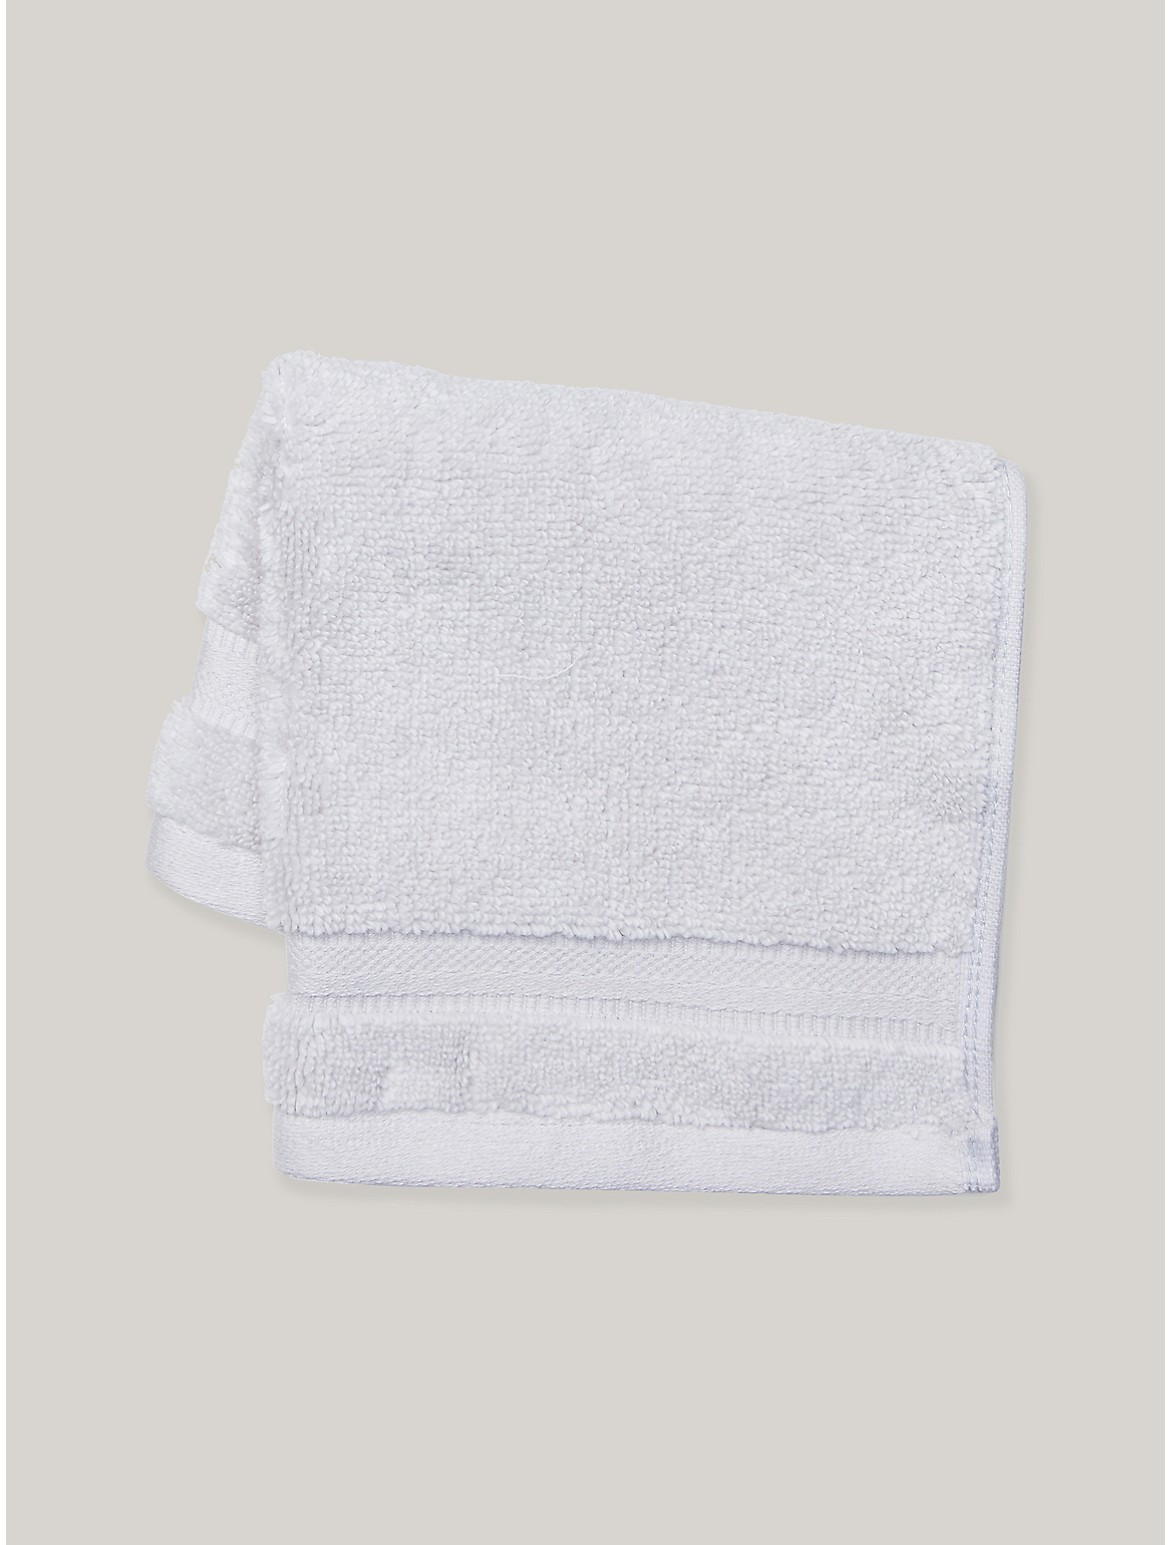 Tommy Hilfiger Signature Solid Washcloth in Light Gray - Grey